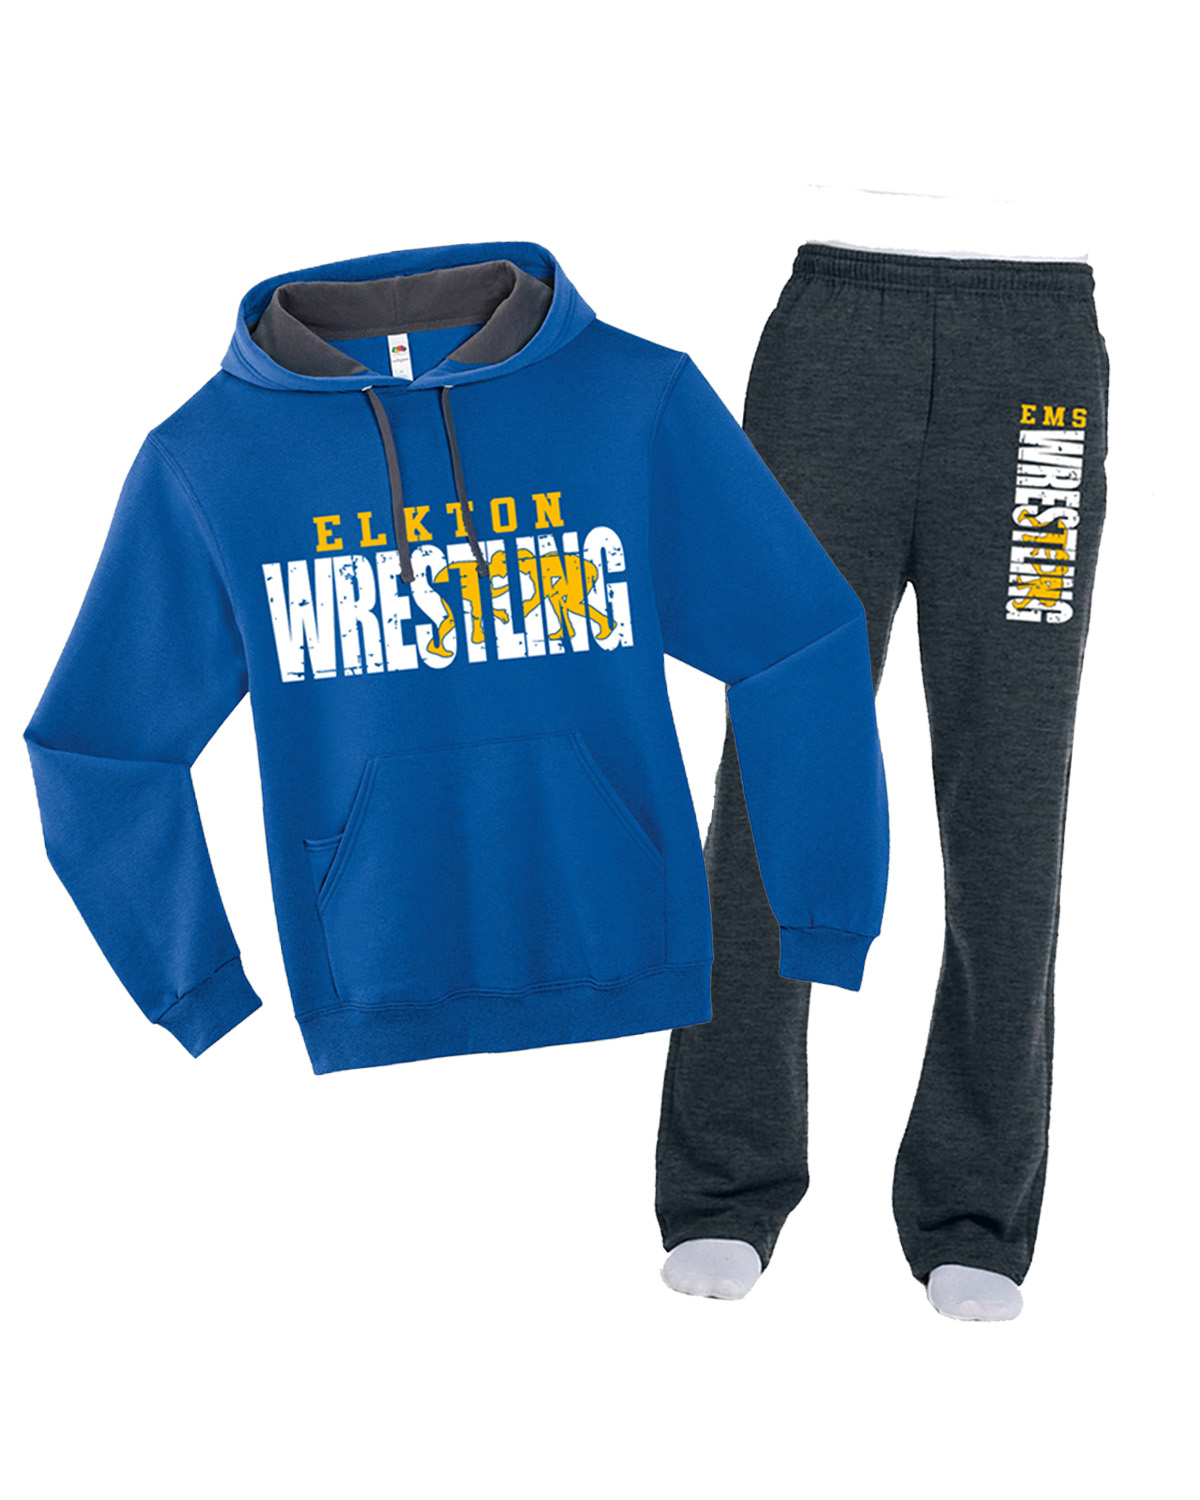 Adult size - Sweatpants/Royal Hoodie Combo ($60/bundle - MUST PURCHASE BOTH FOR DISCOUNT)